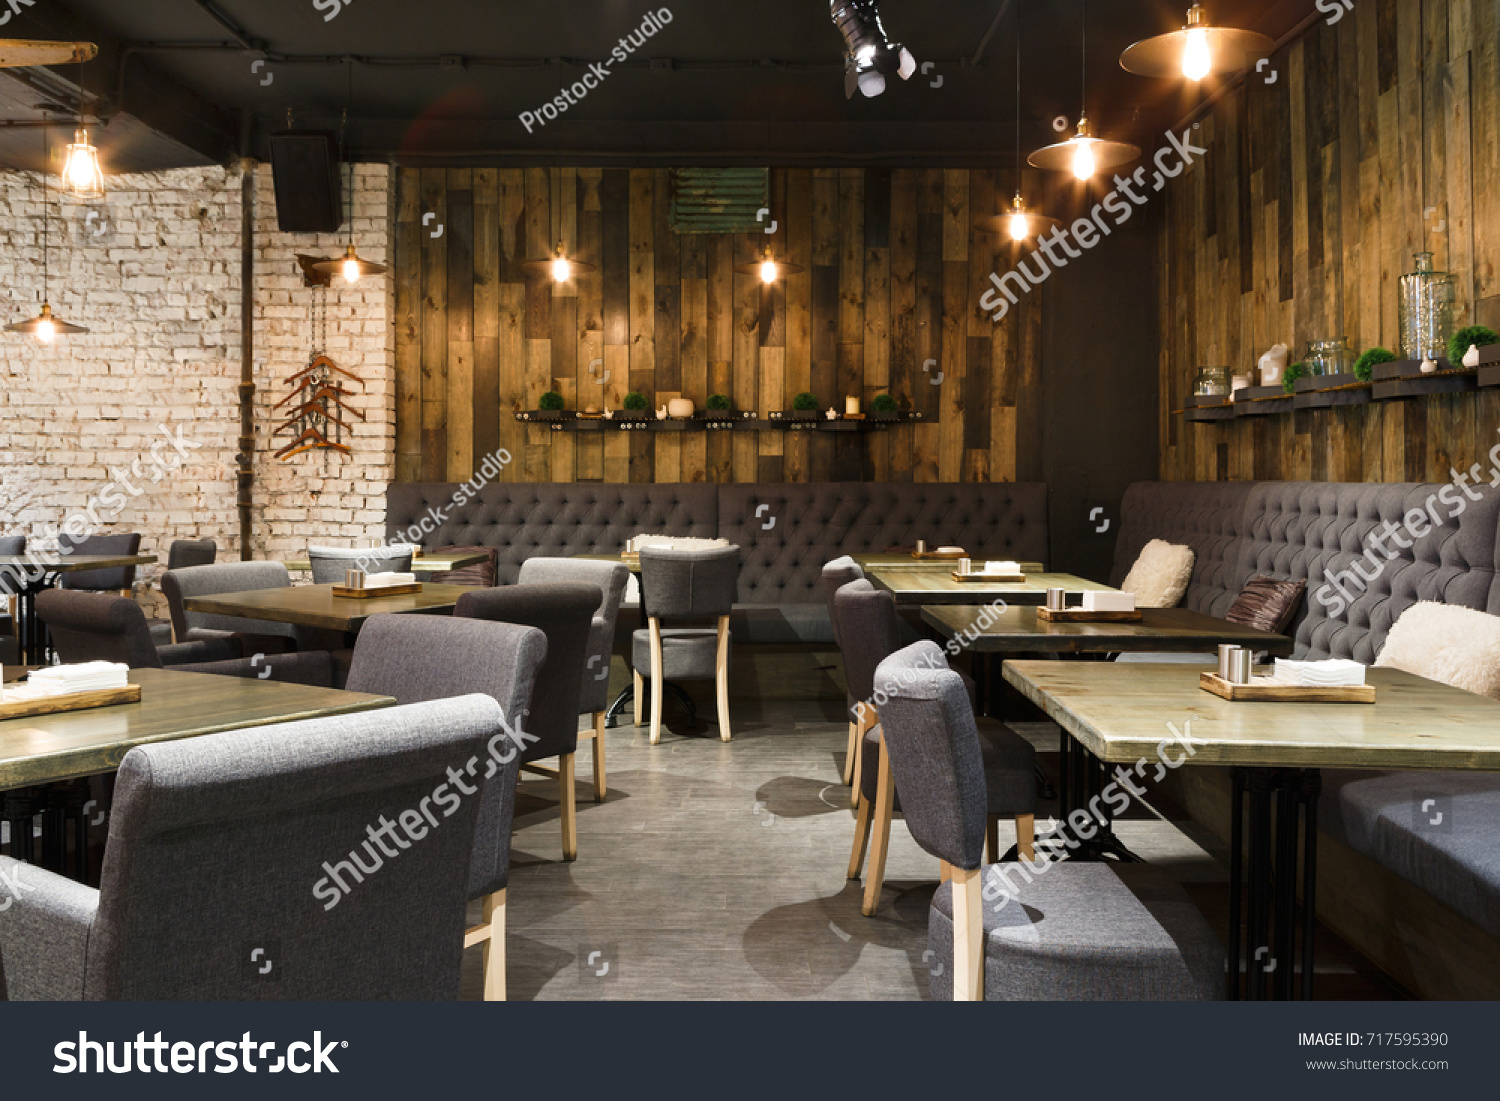 Cozy wooden interior of restaurant, copy space. Comfortable modern dining place, contemporary design background #717595390